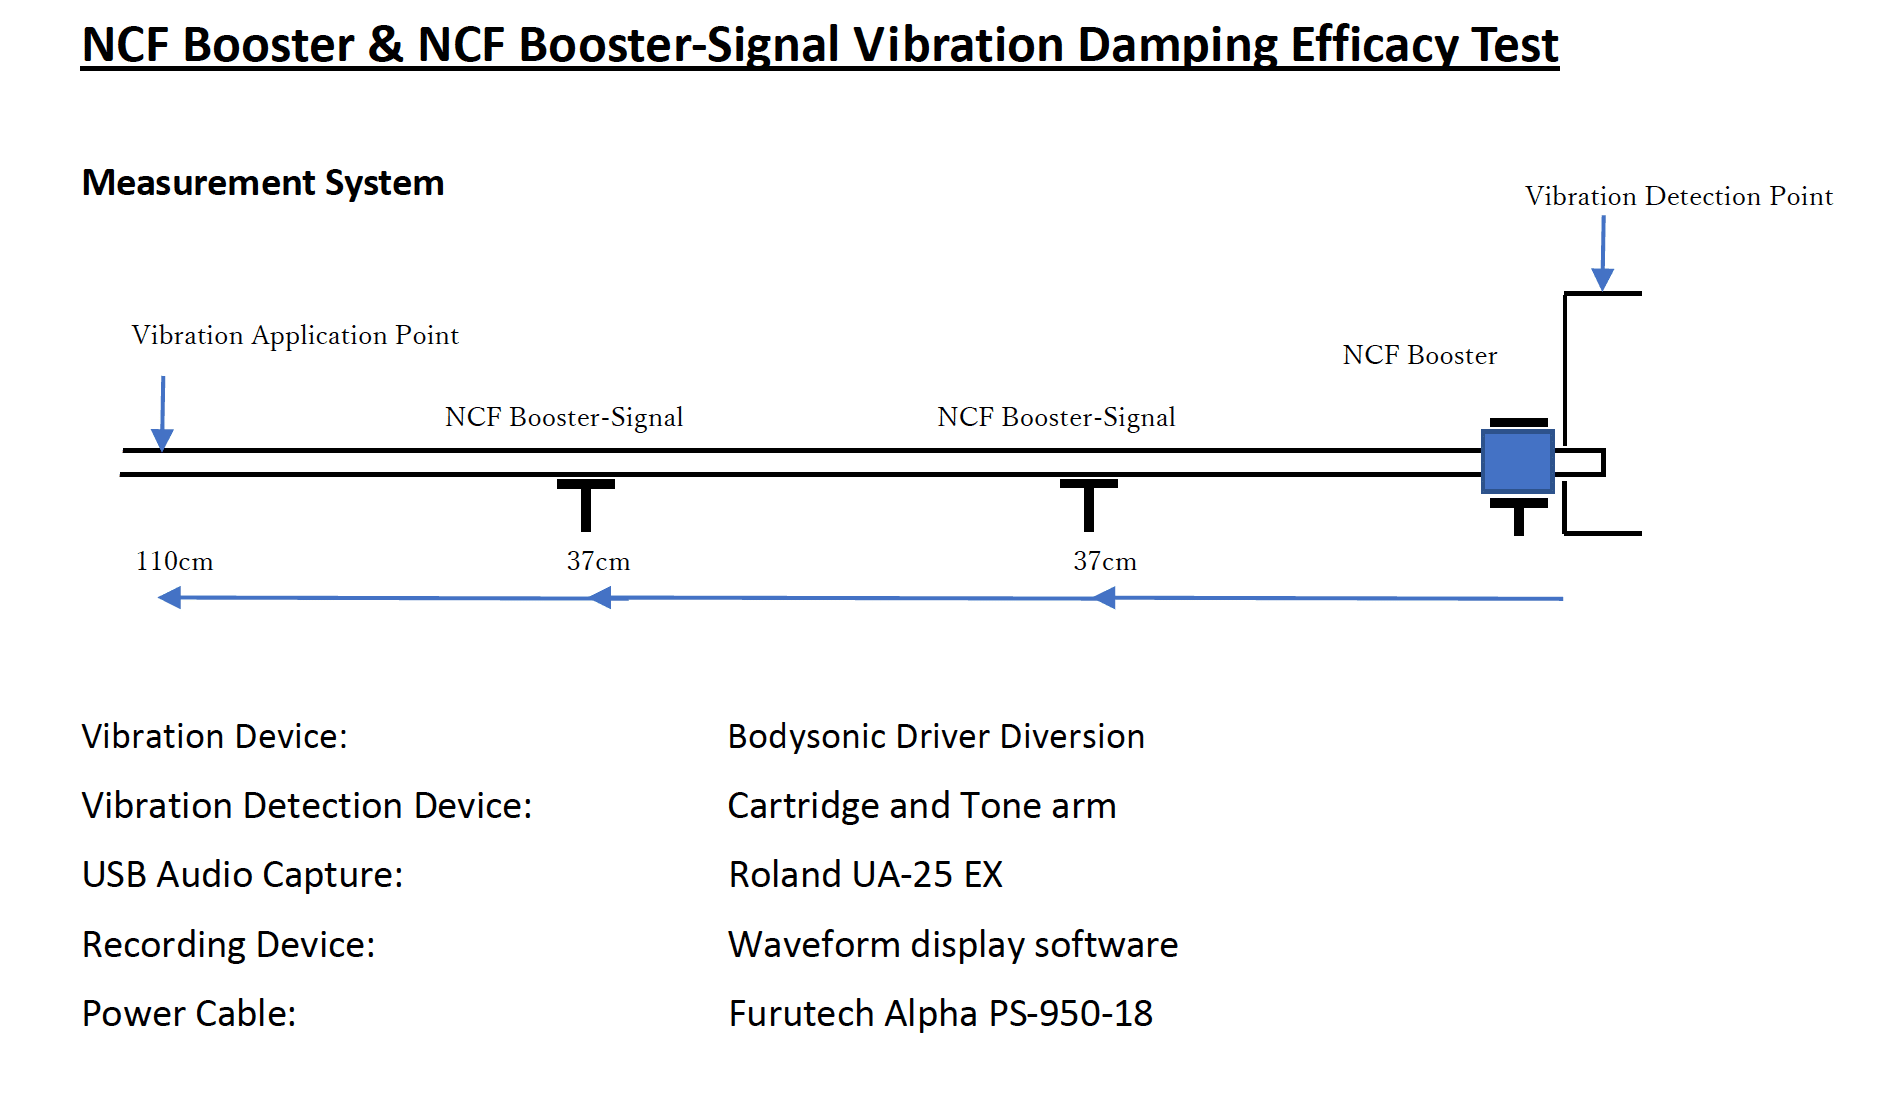 Boosters & Booster Signals From Furutech